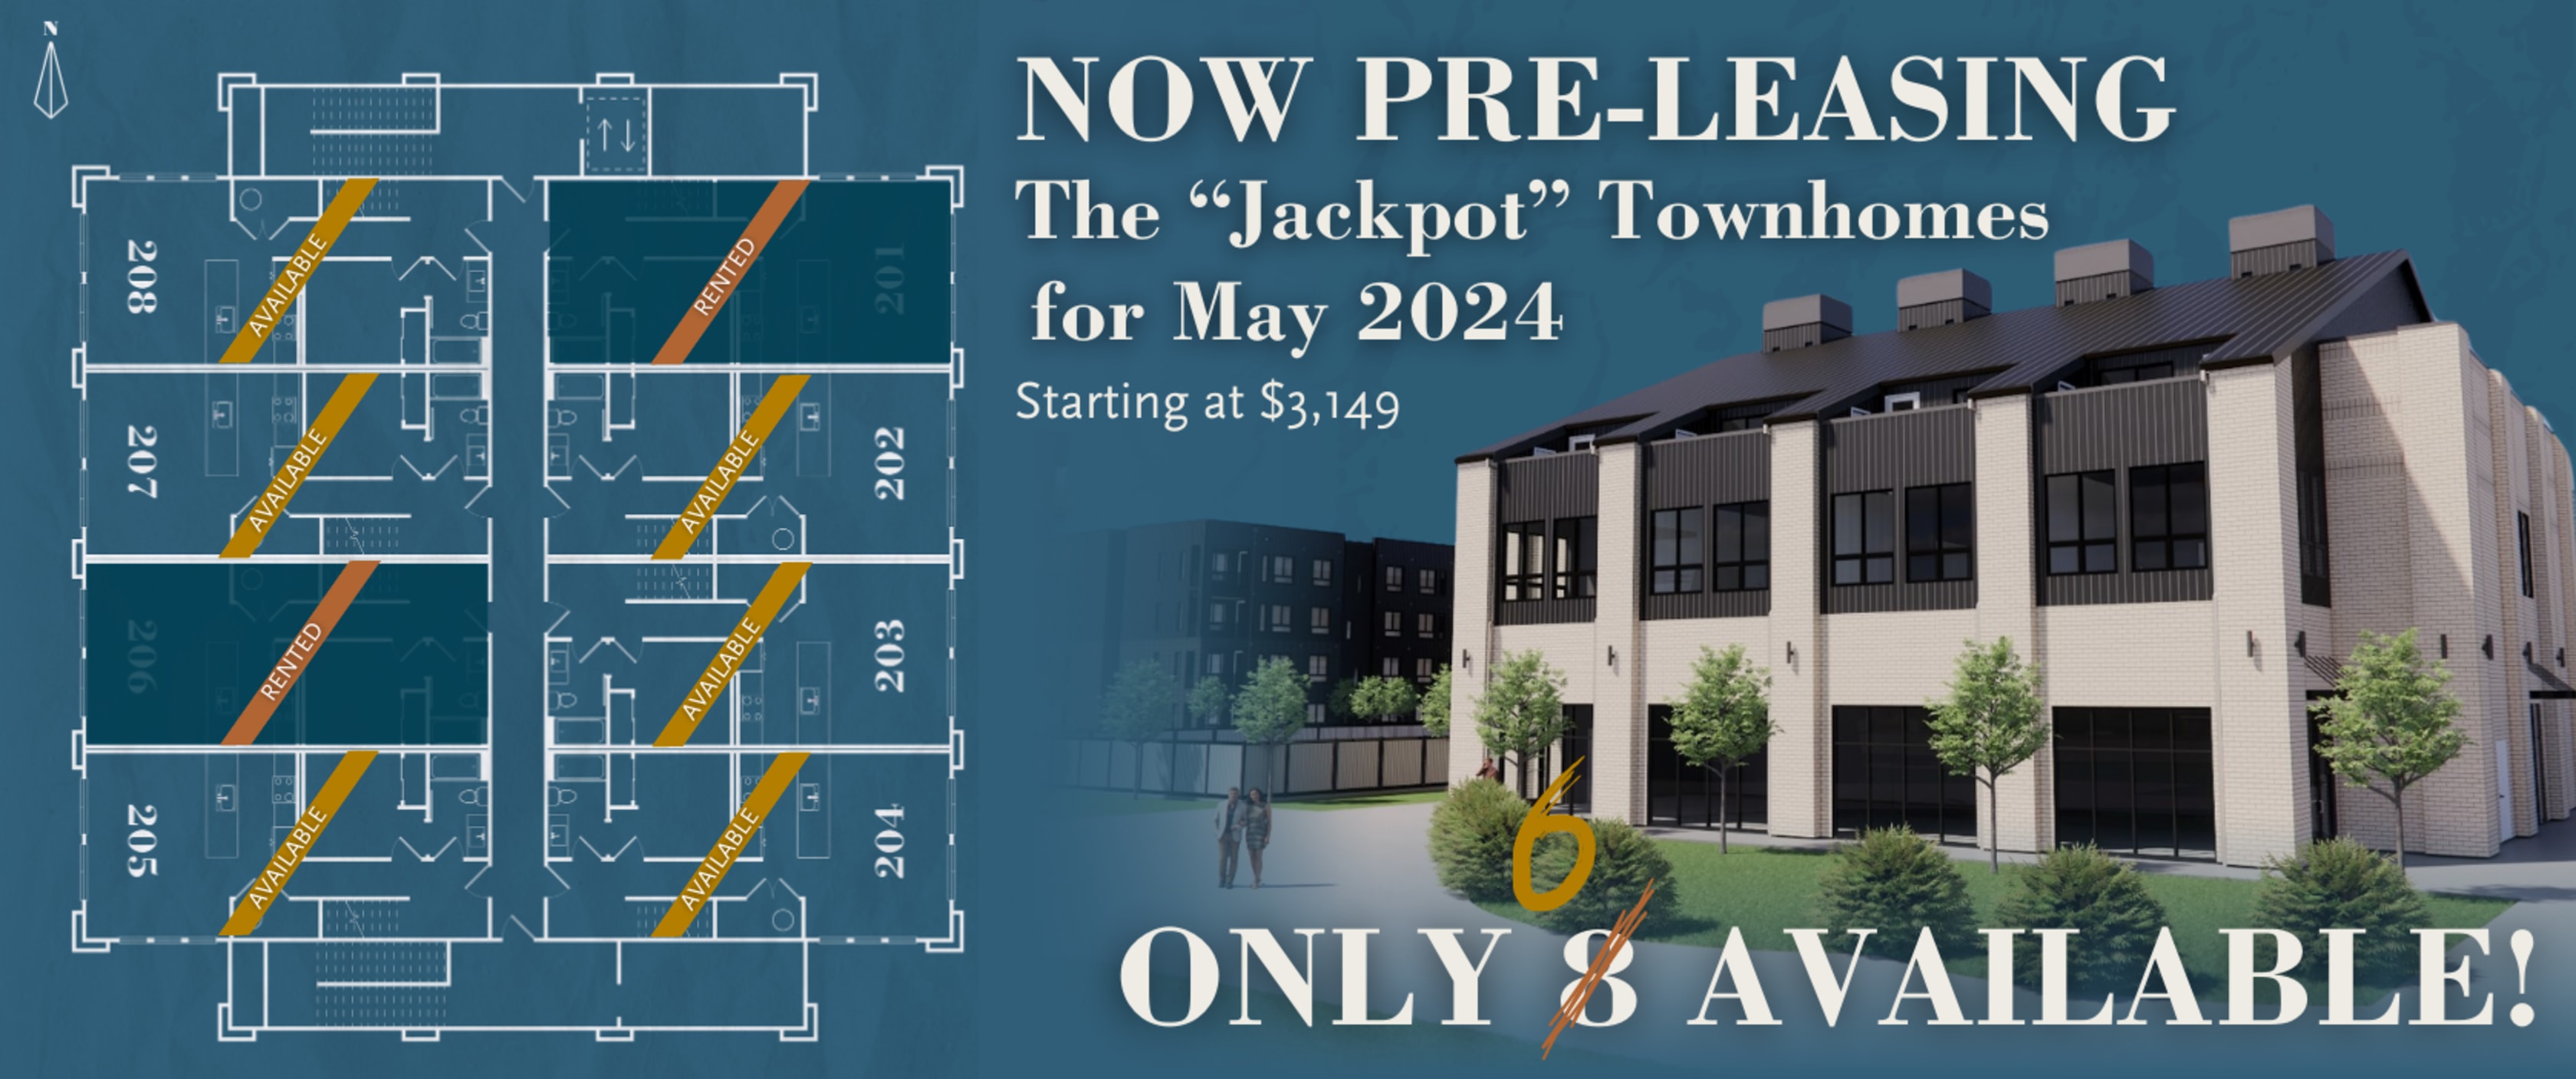 Now Pre-Leasing the Jackpot Townhome floor plan!